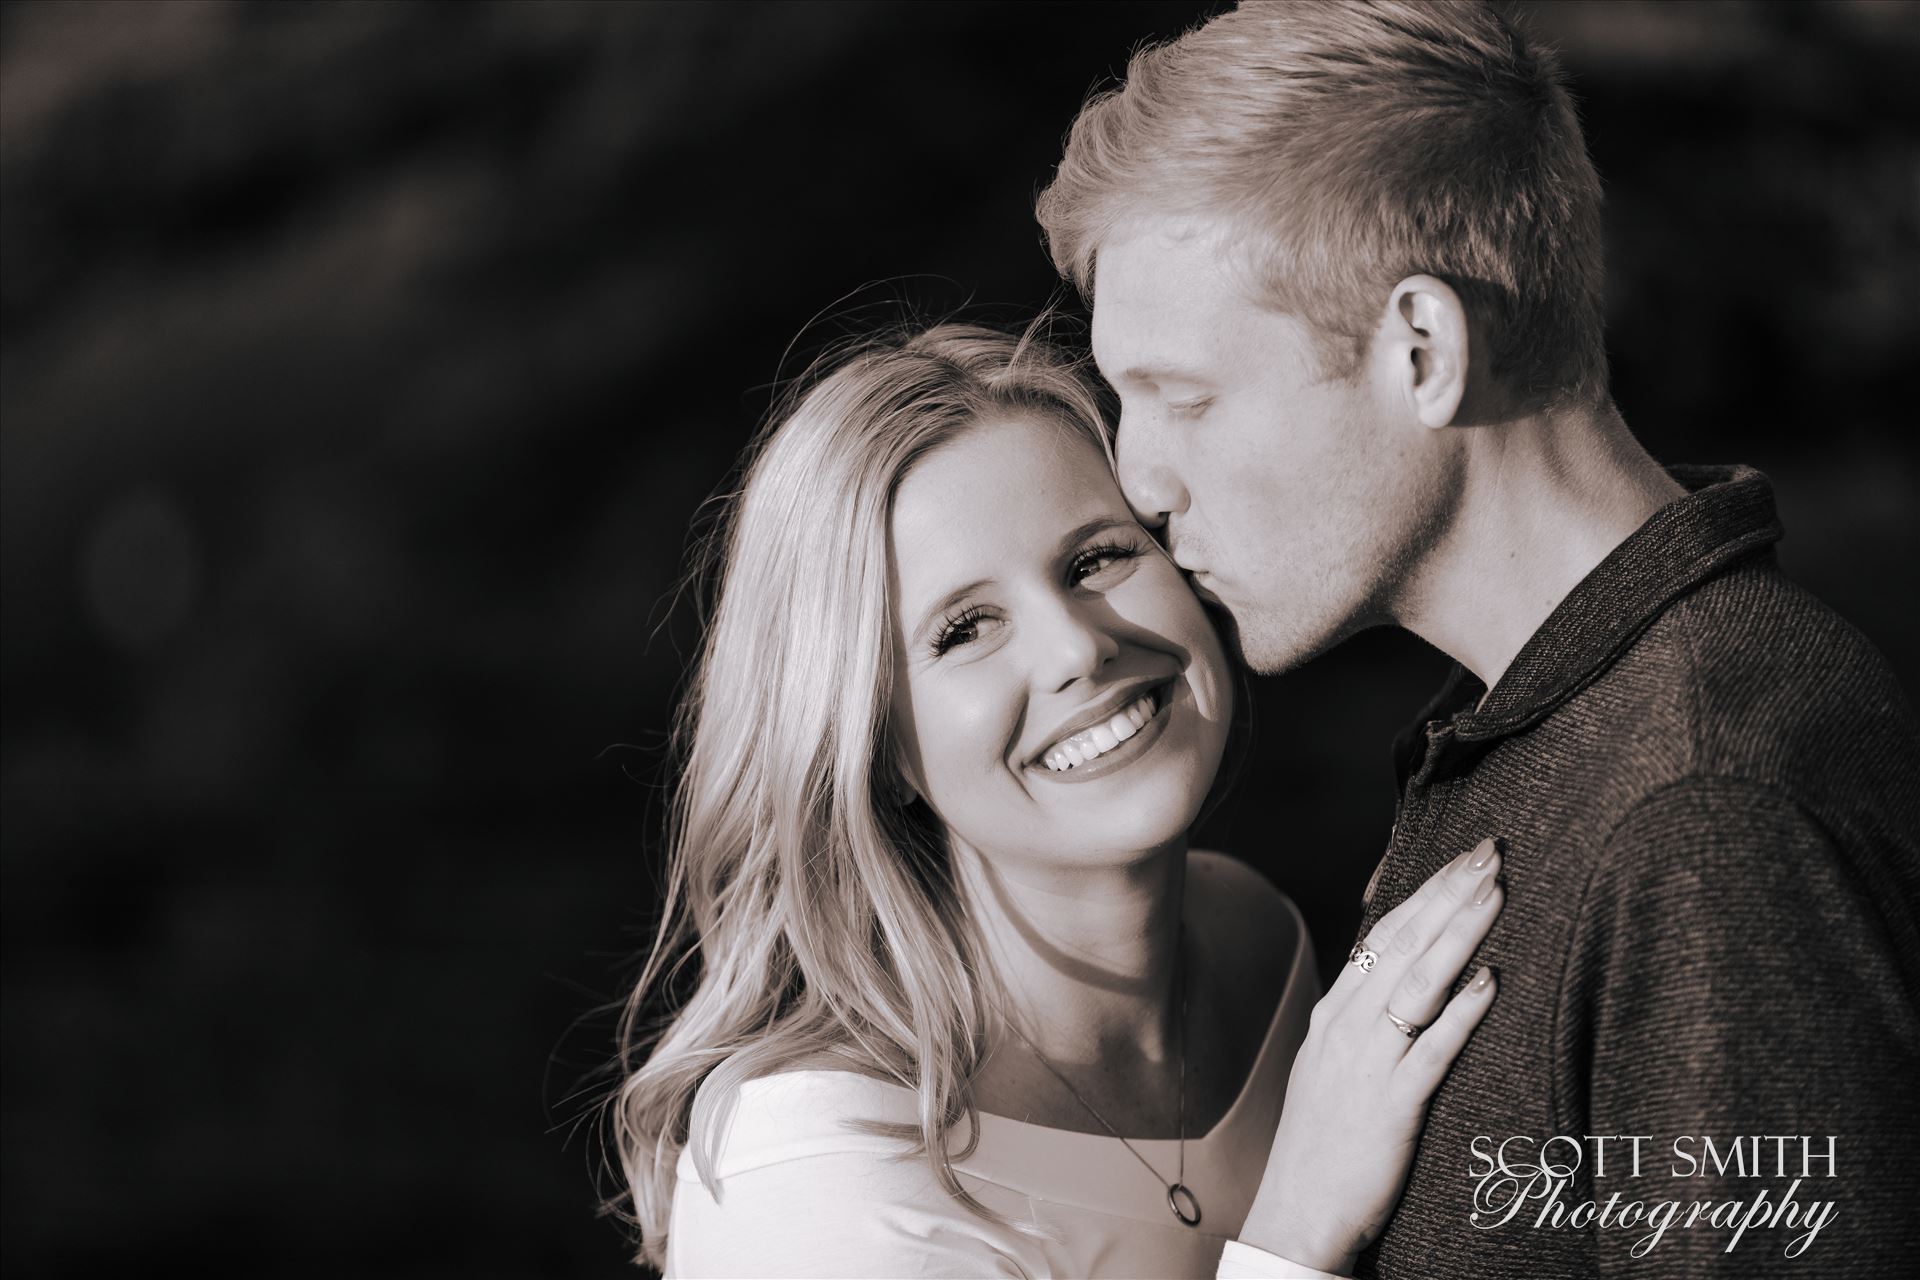 Joanna and Ryan 2 - Joanna and Ryan's engagement session at Spooner's Cover, California. by Scott Smith Photos